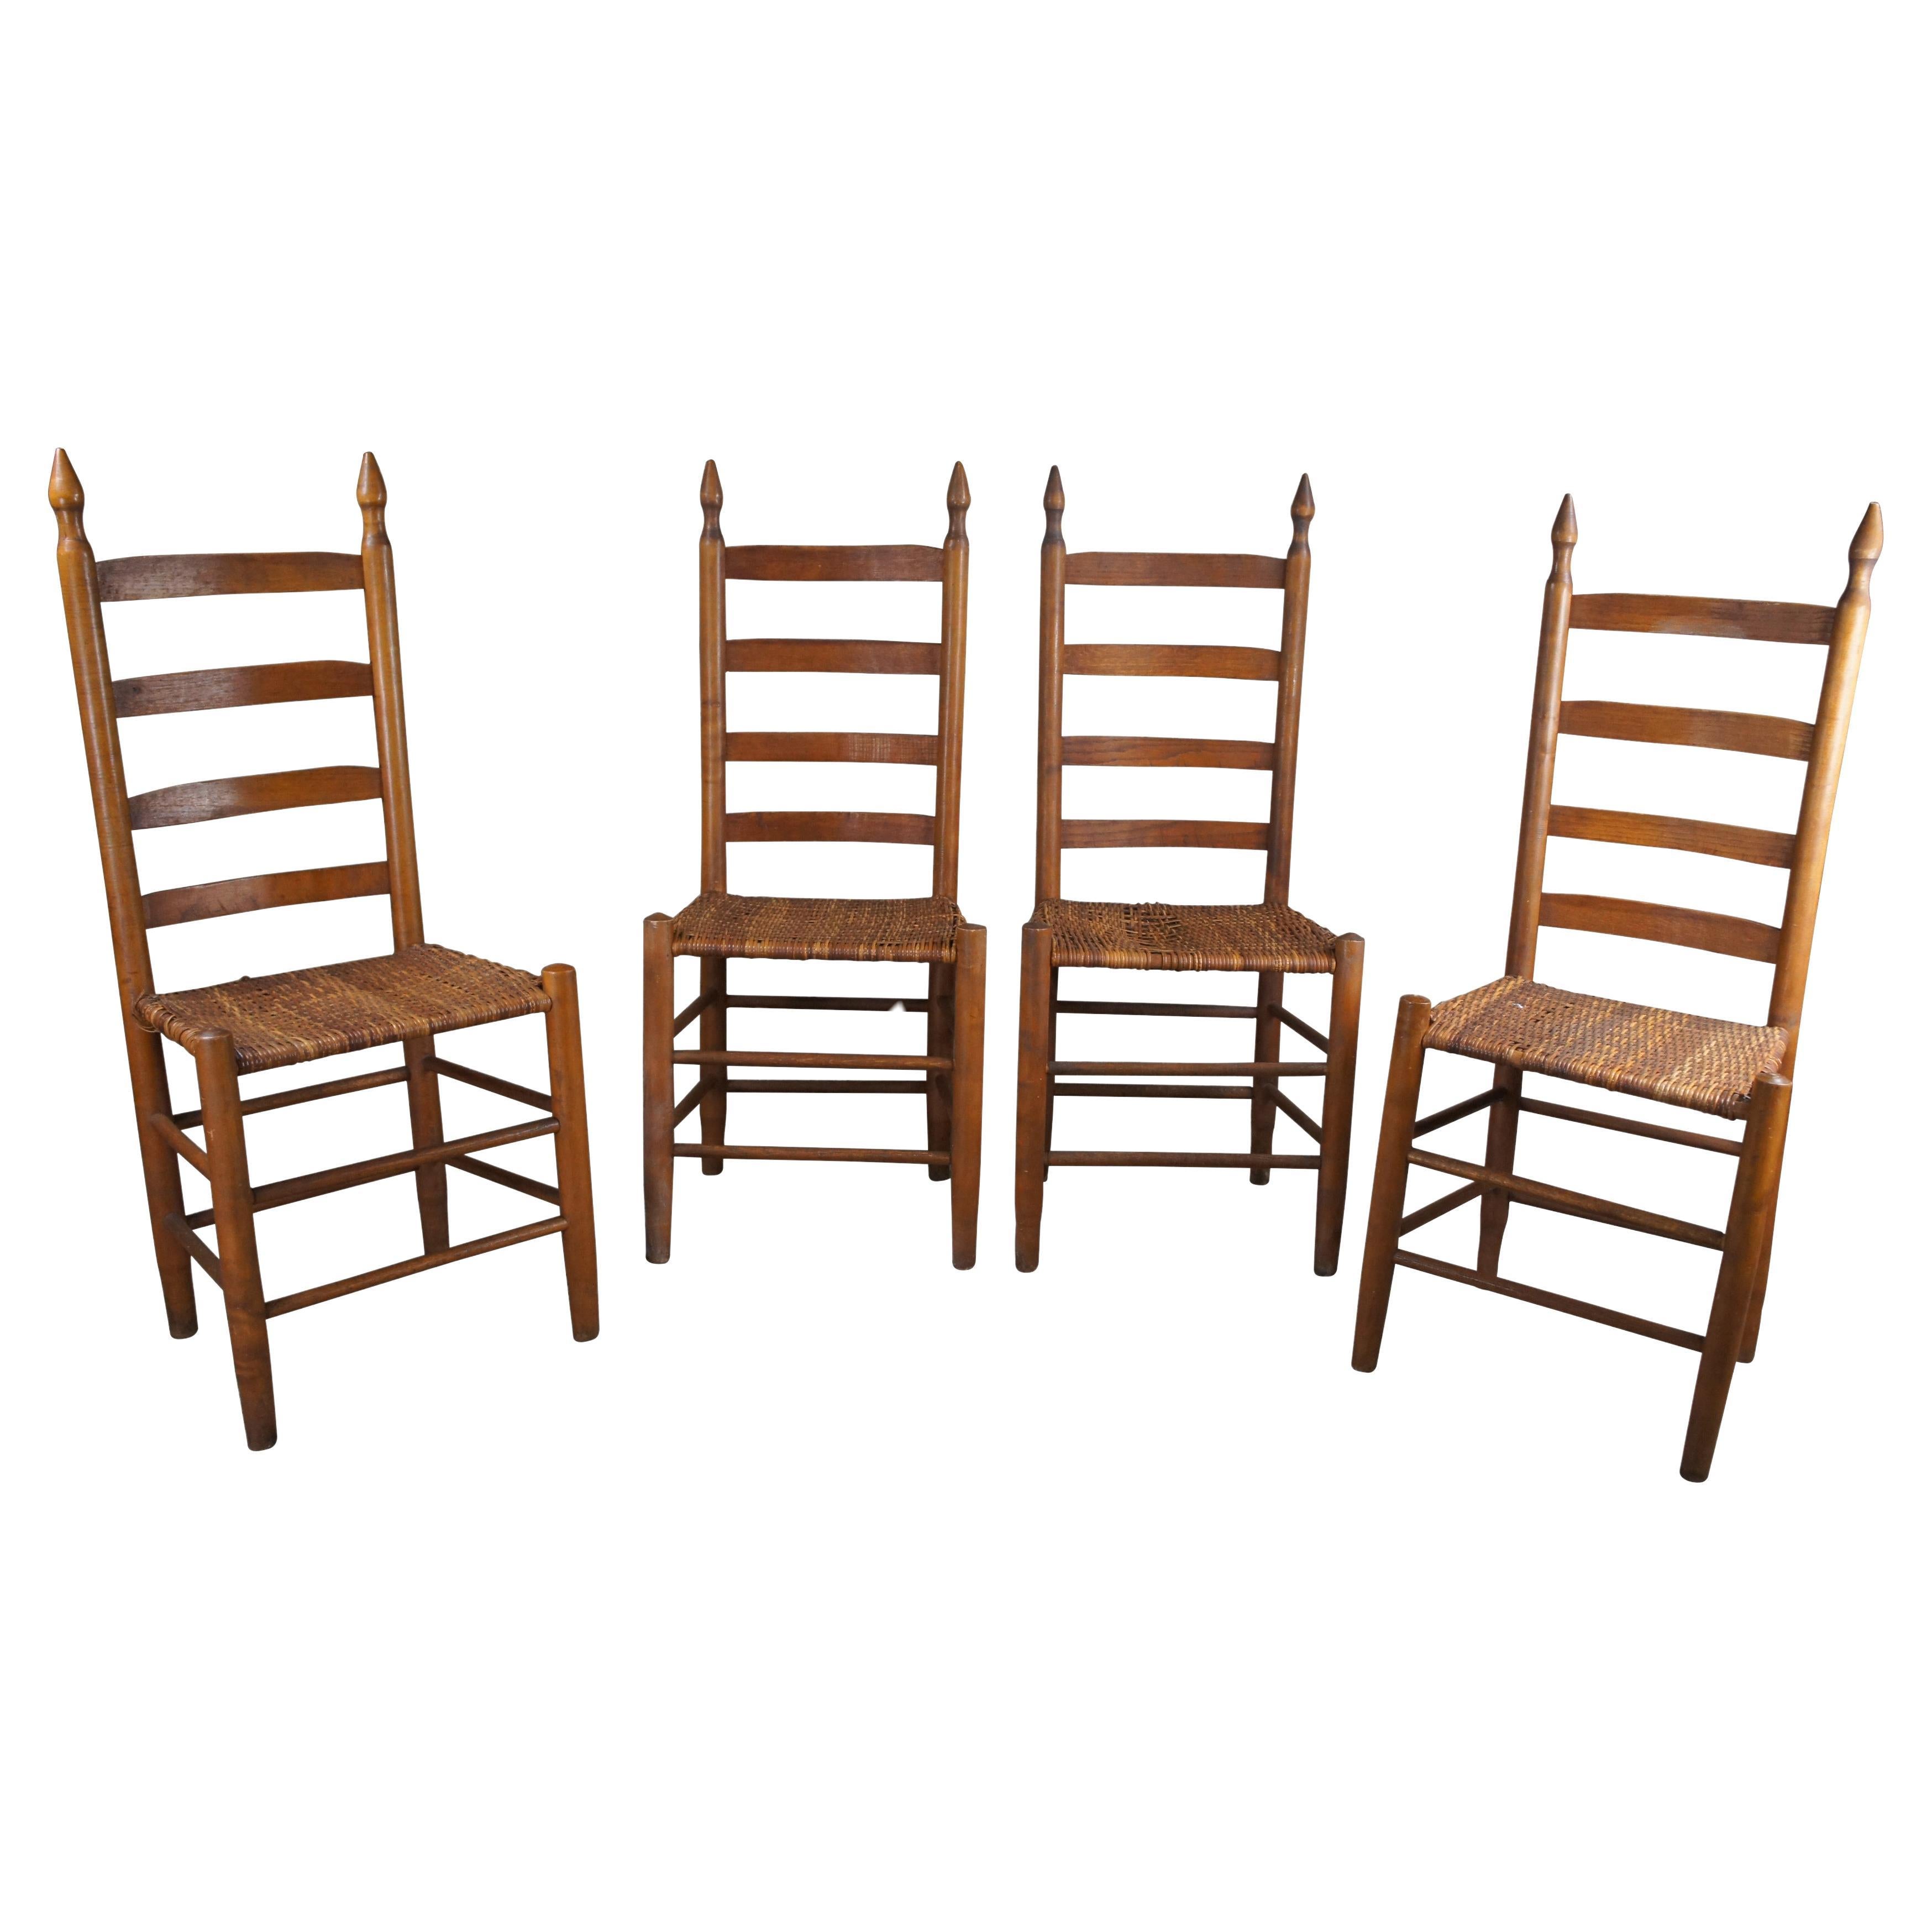 4 Antique Primitive Shaker Oak Farmhouse Country Ladderback Rattan Dining Chairs For Sale